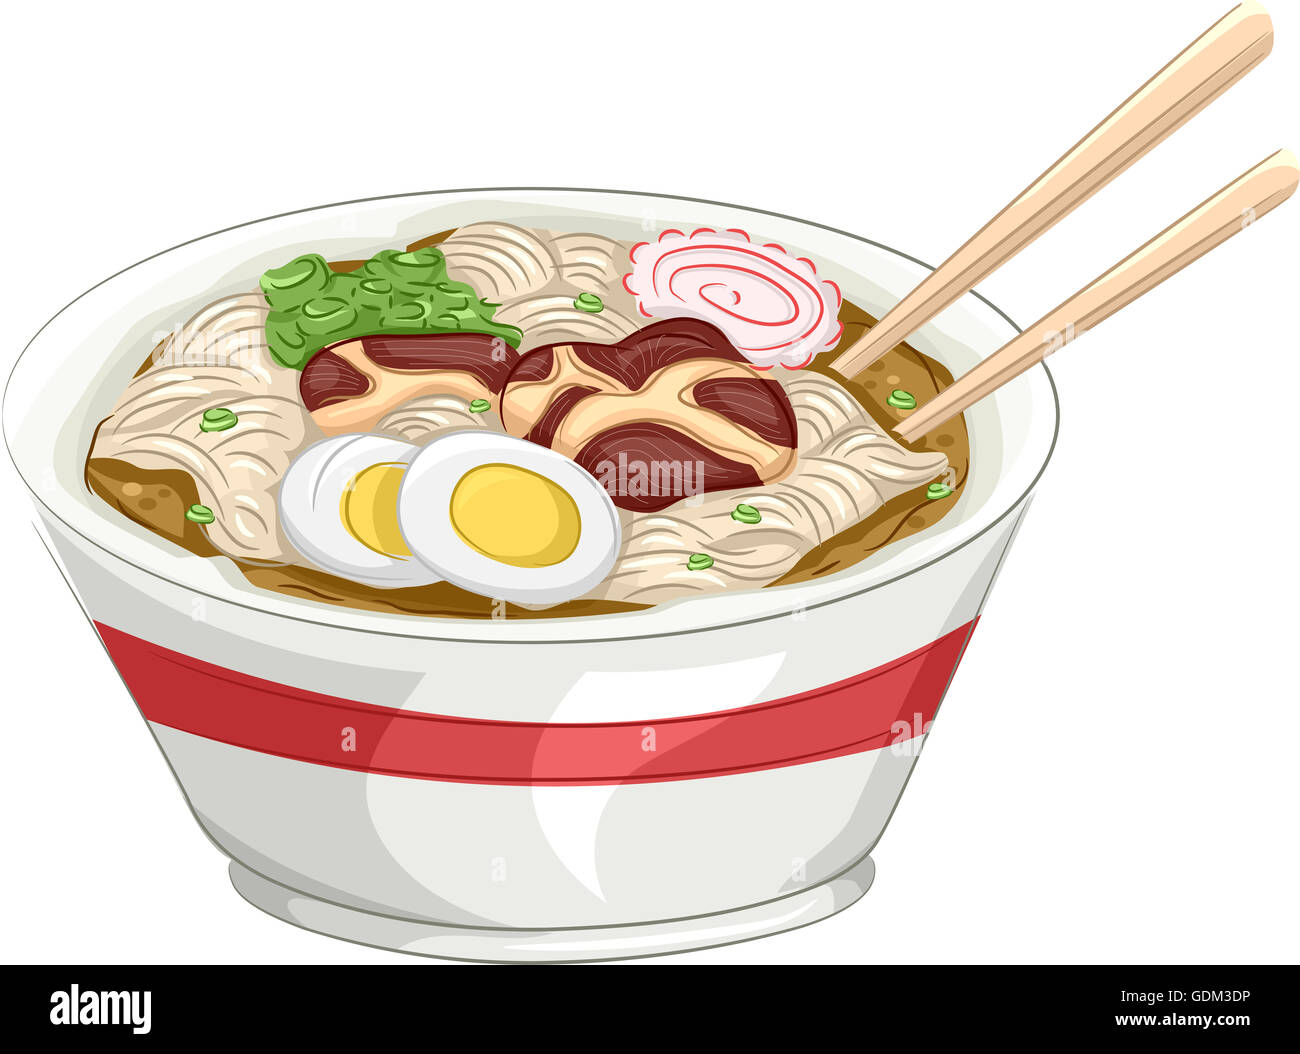 Illustration of a Bowl of Naruto Ramen With a Pair of Chopsticks Resting on the Side Stock Photo